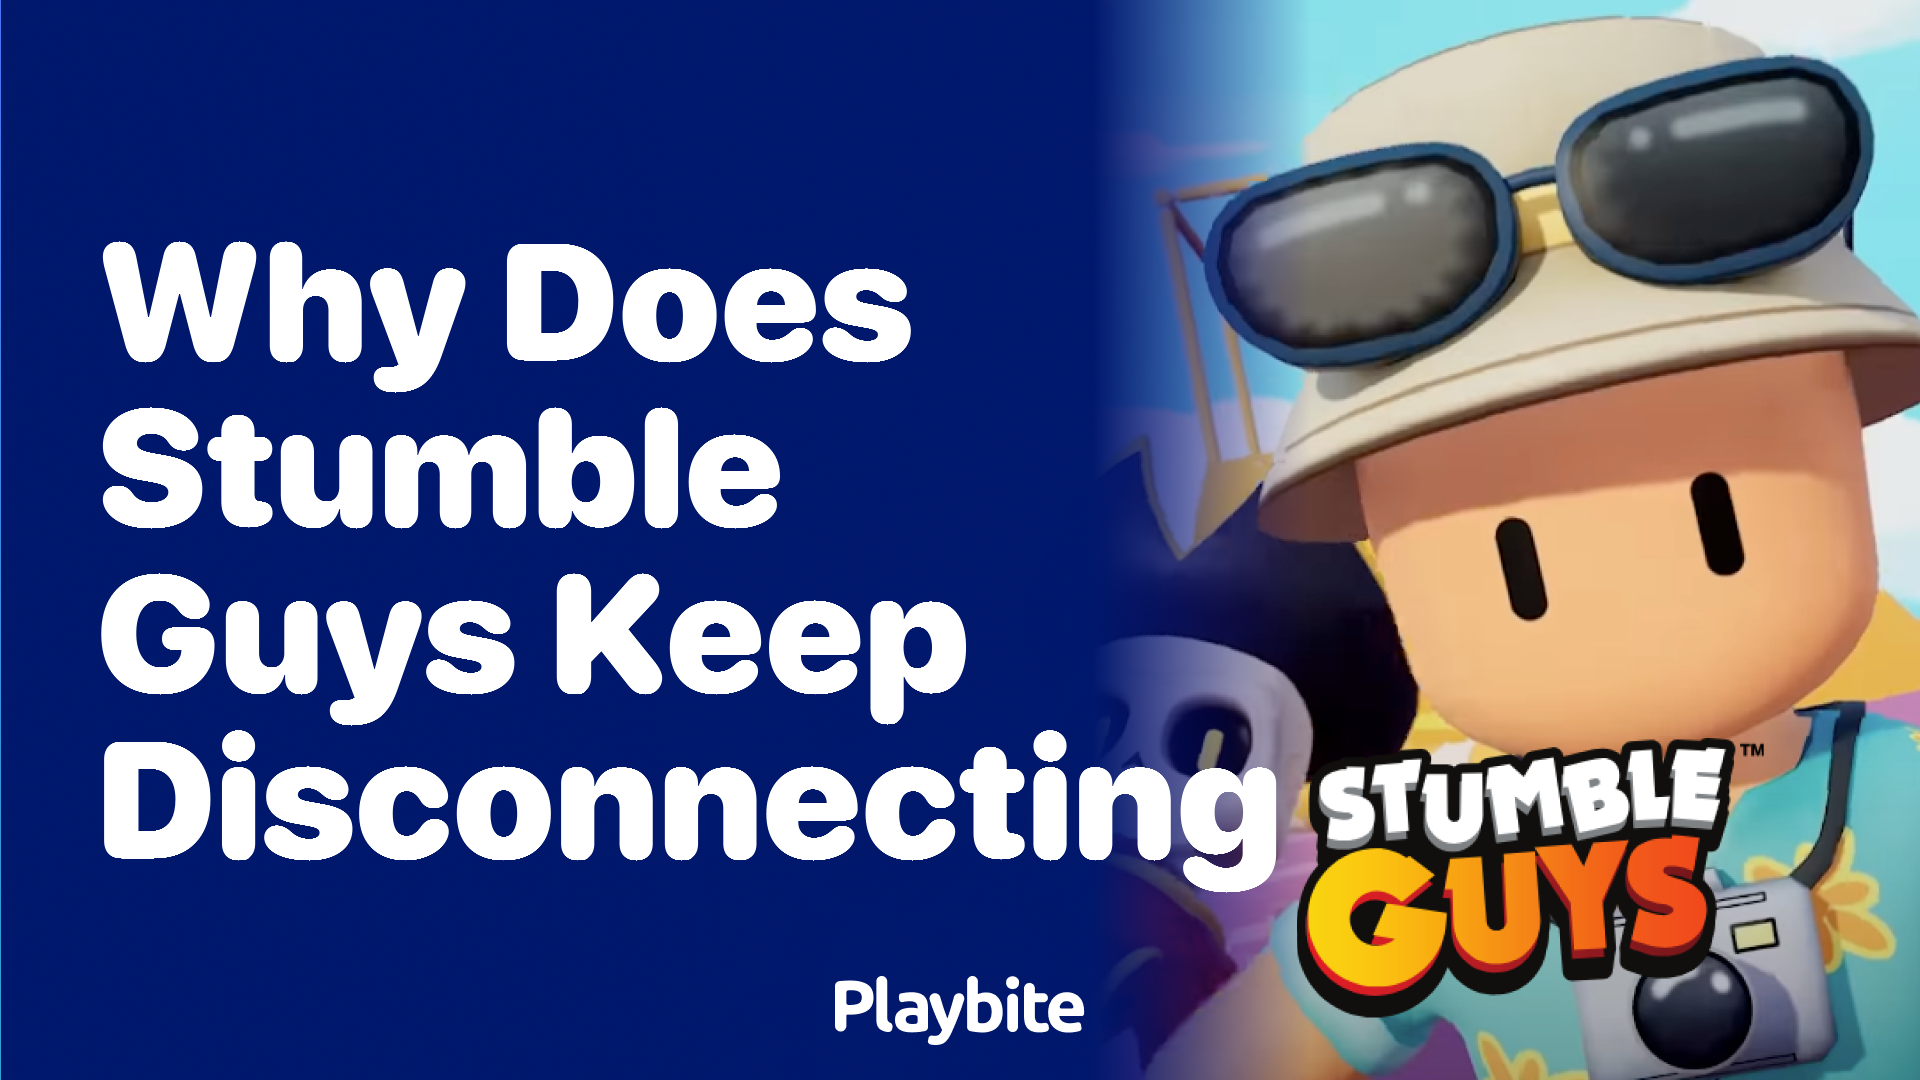 Why Does Stumble Guys Keep Disconnecting? Let&#8217;s Find Out!